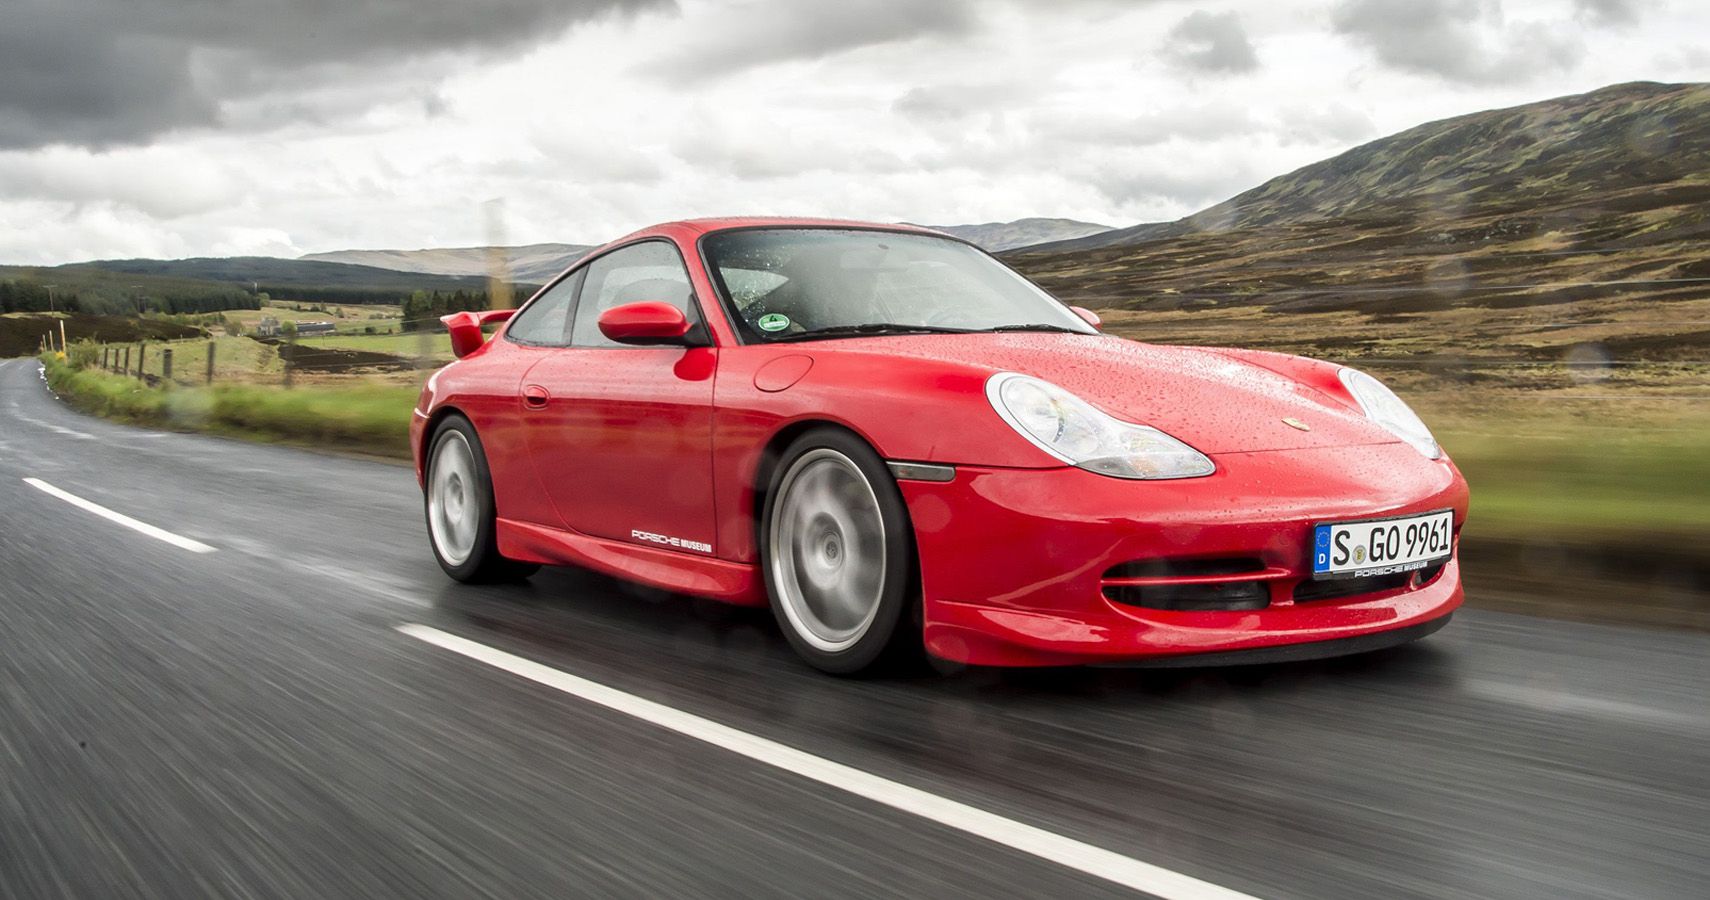 The Porsche 996 Became The First GT3 Badged Car To Hit The Road And It Created Quite The Ripples Back In 1999